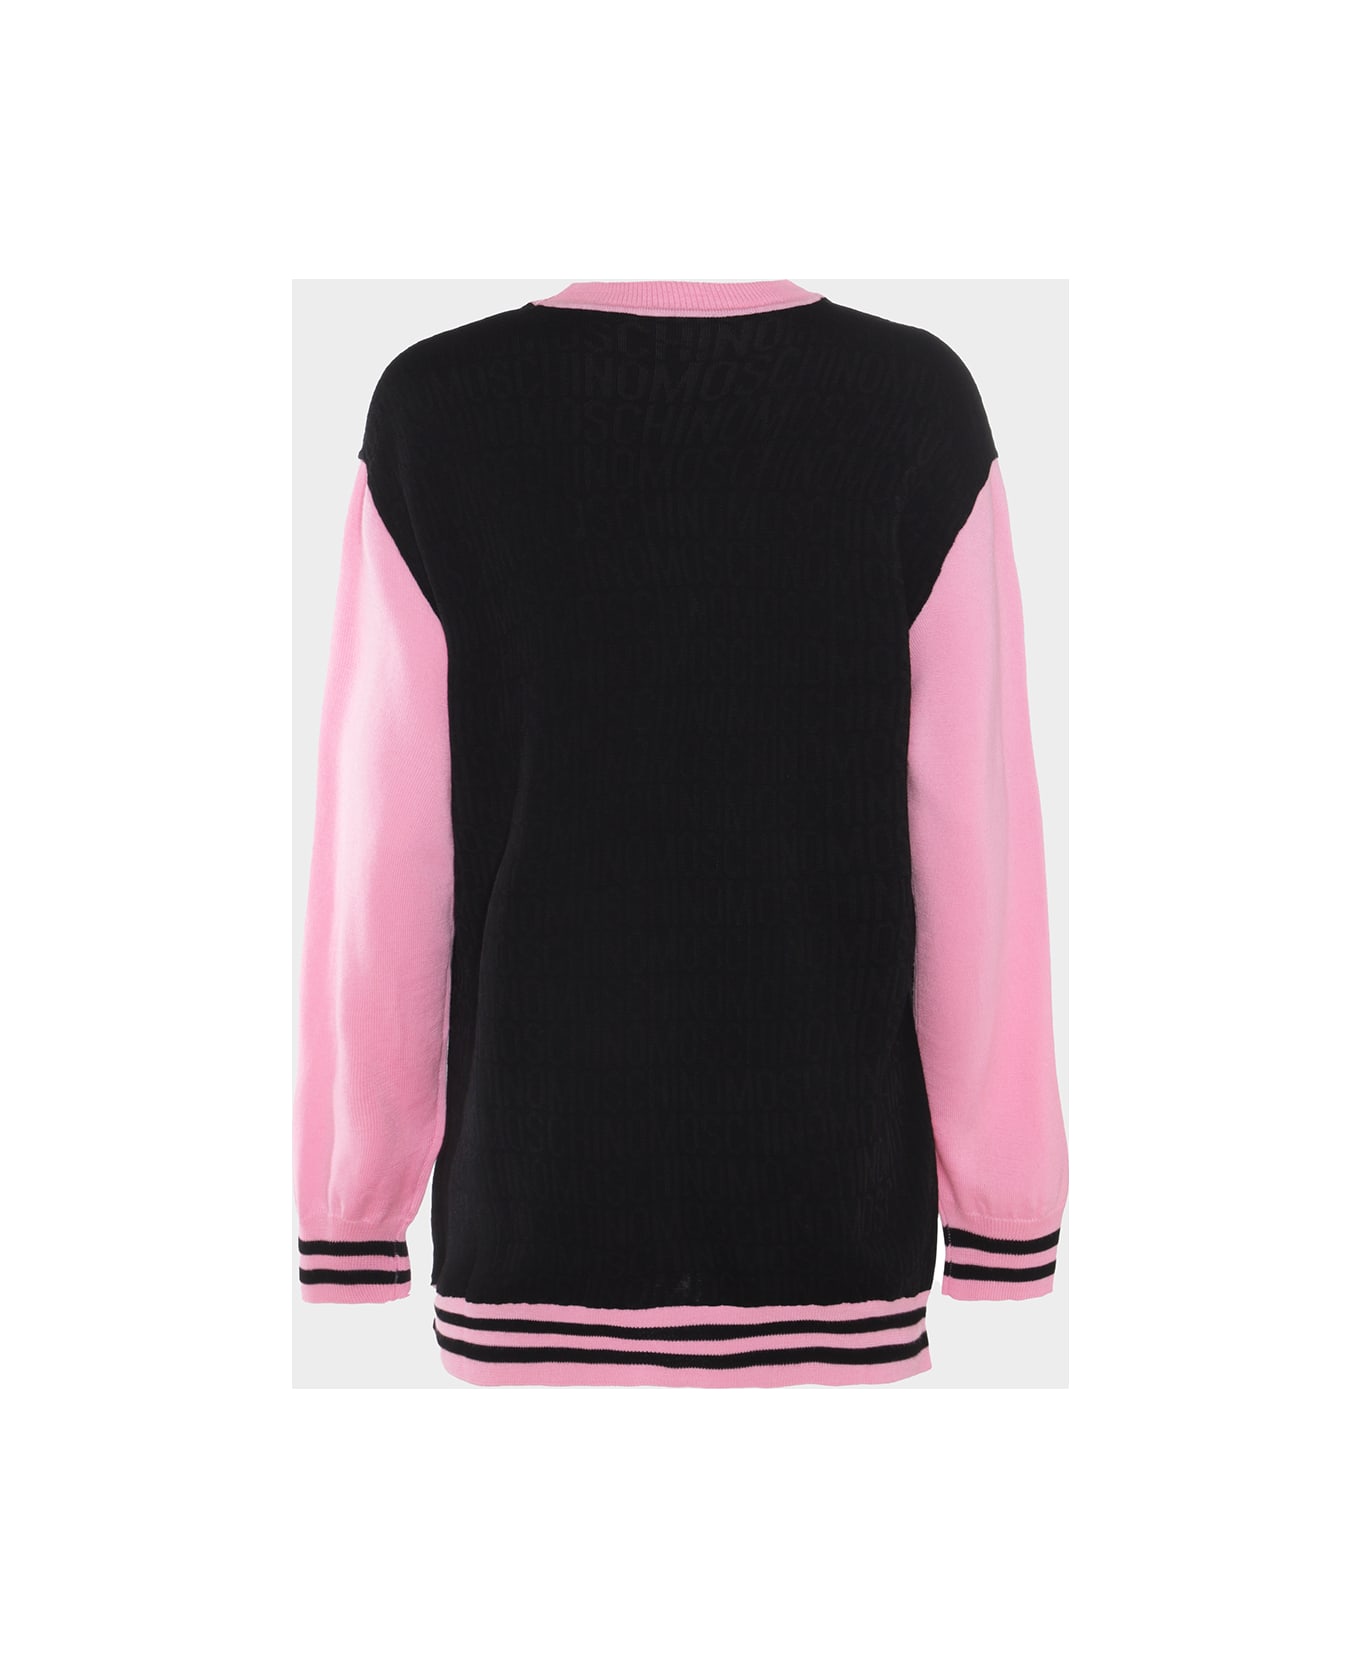 Moschino Black And Pink Wool Knitwear - Black